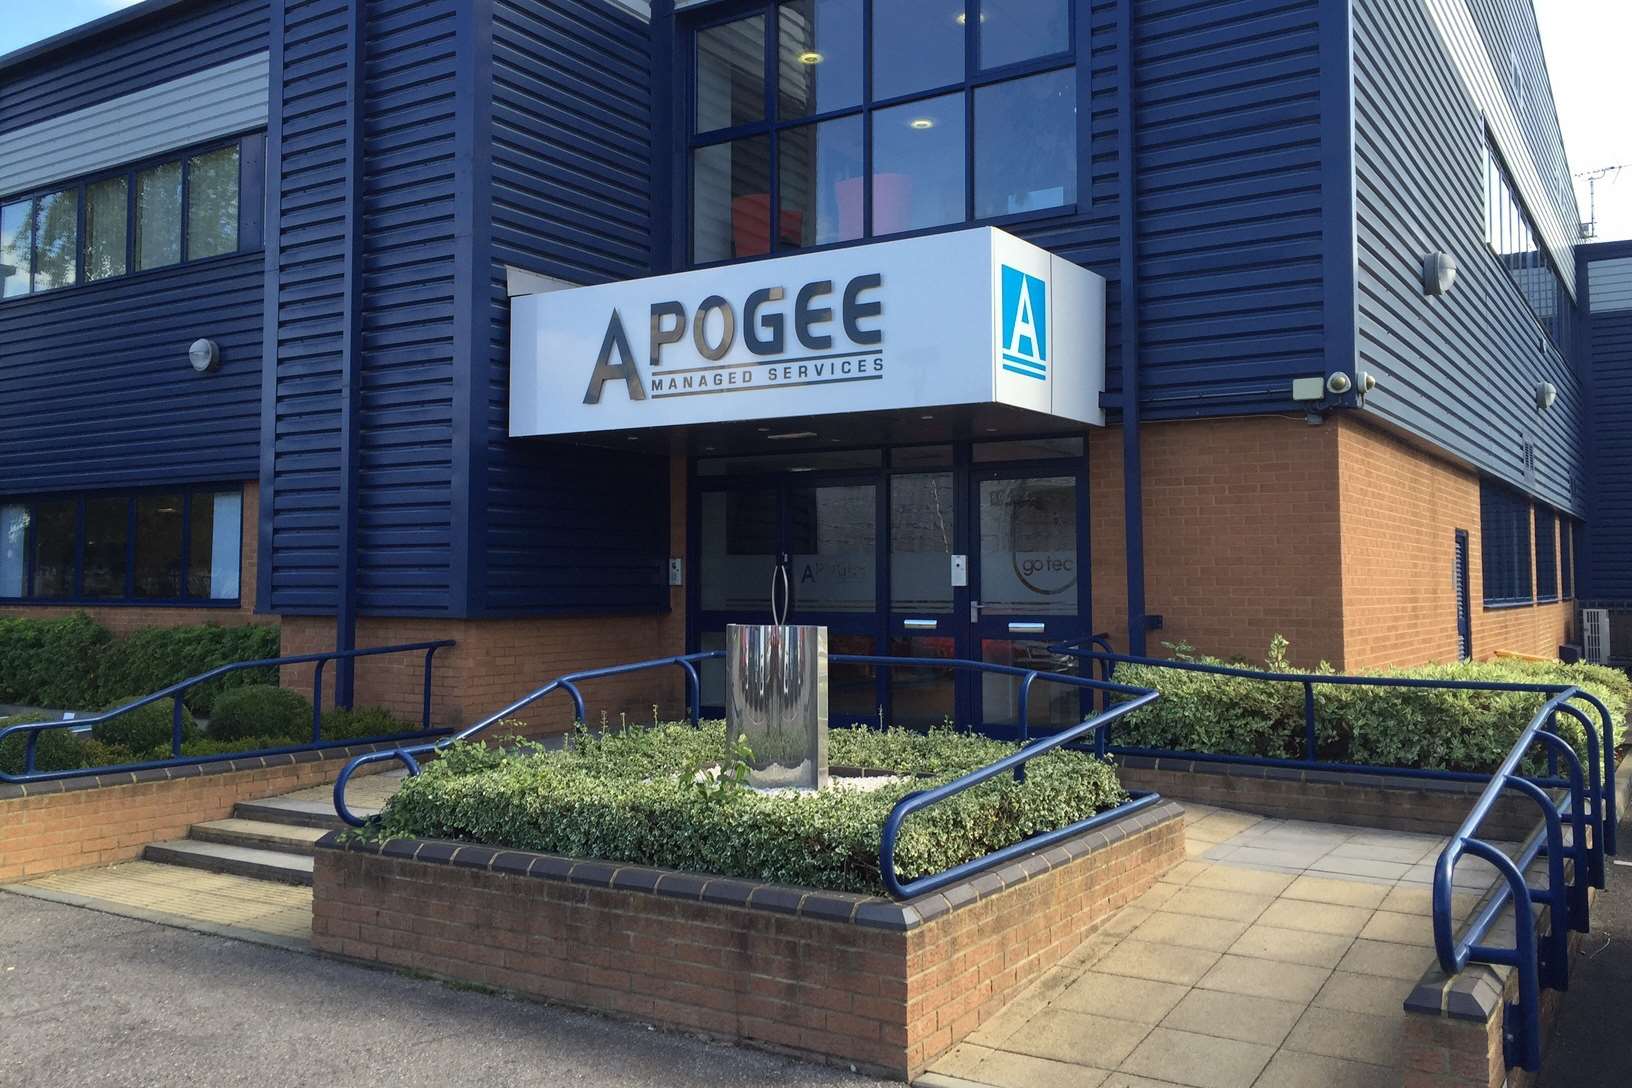 Printer business Apogee is based in Maidstone